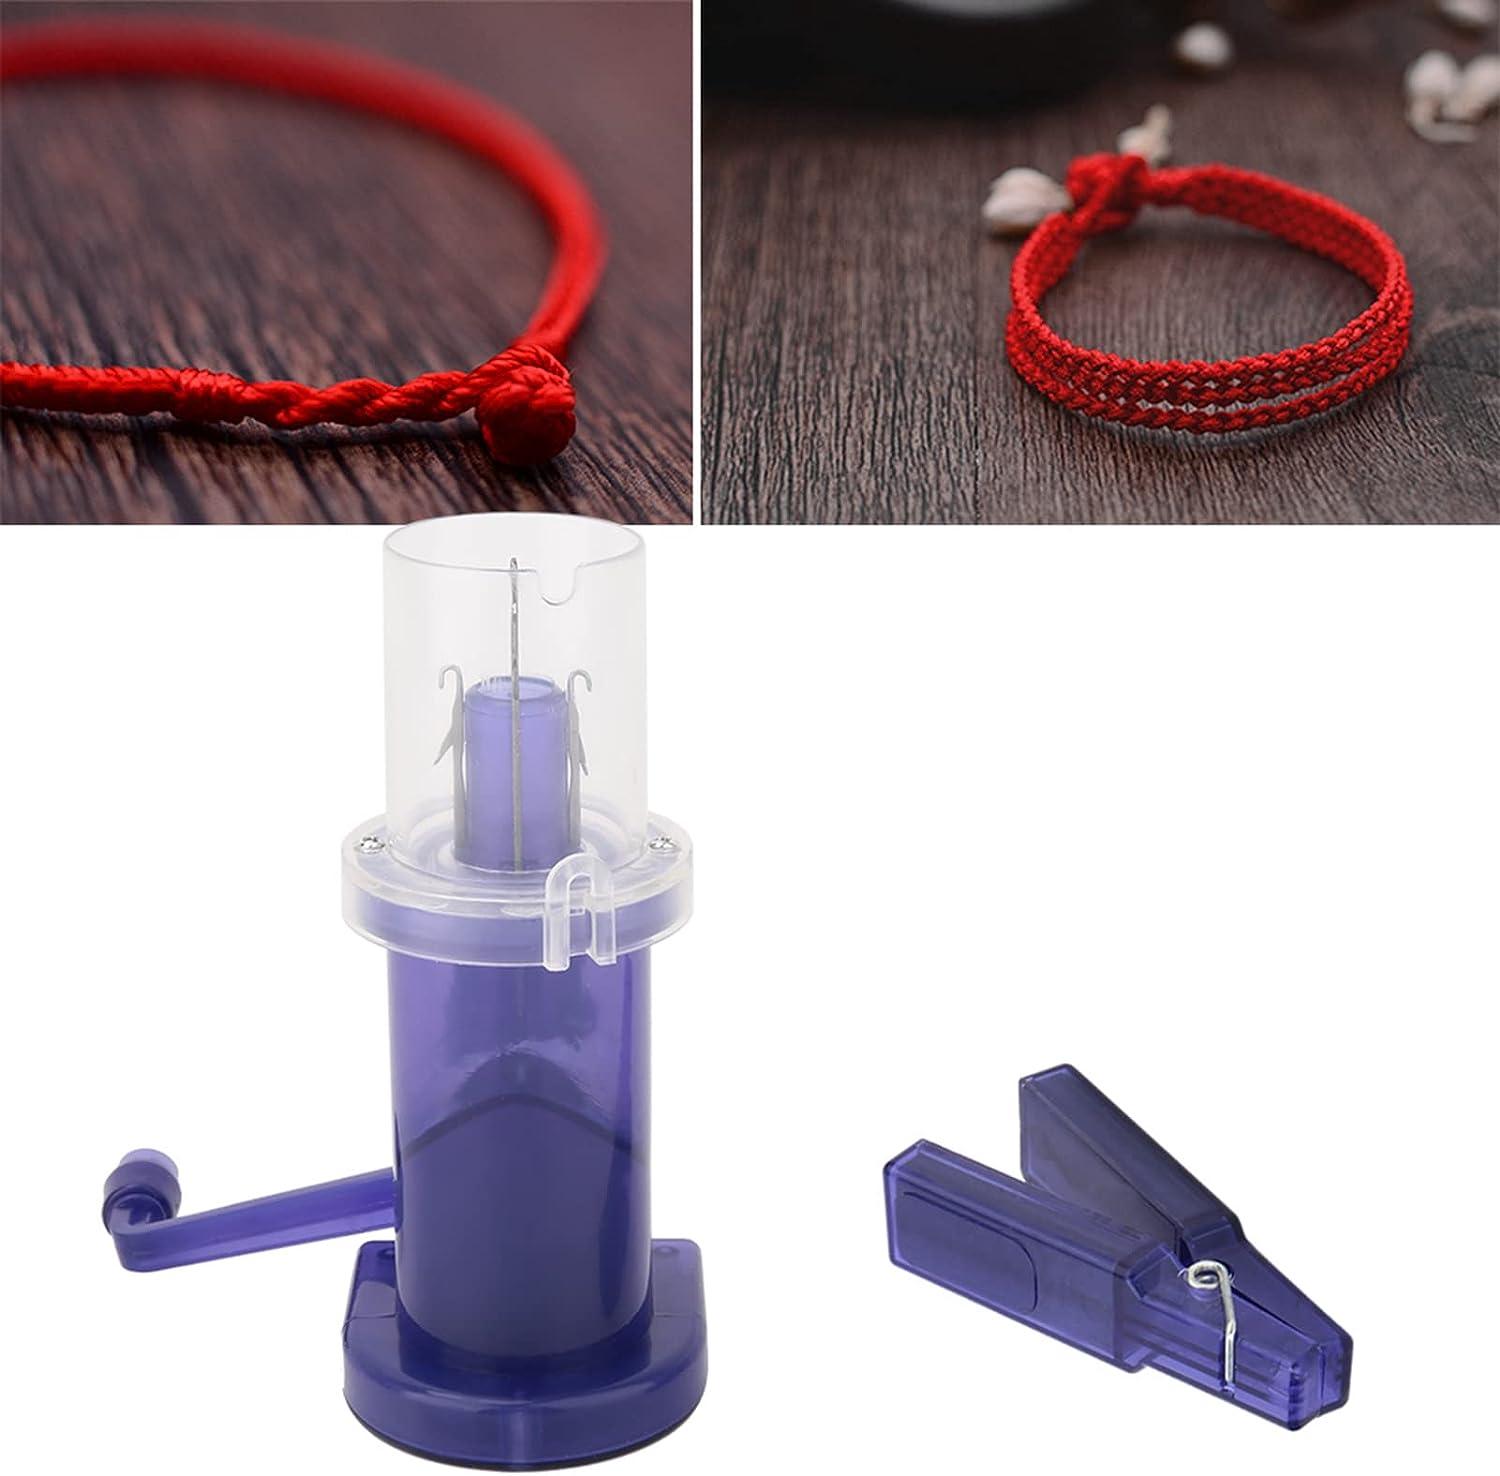  DIY Hand-Operated Knitting Machine, Embellish-Knit Knitting  Sewing Tool Portable Crafts Spool Knitter Weave Tools